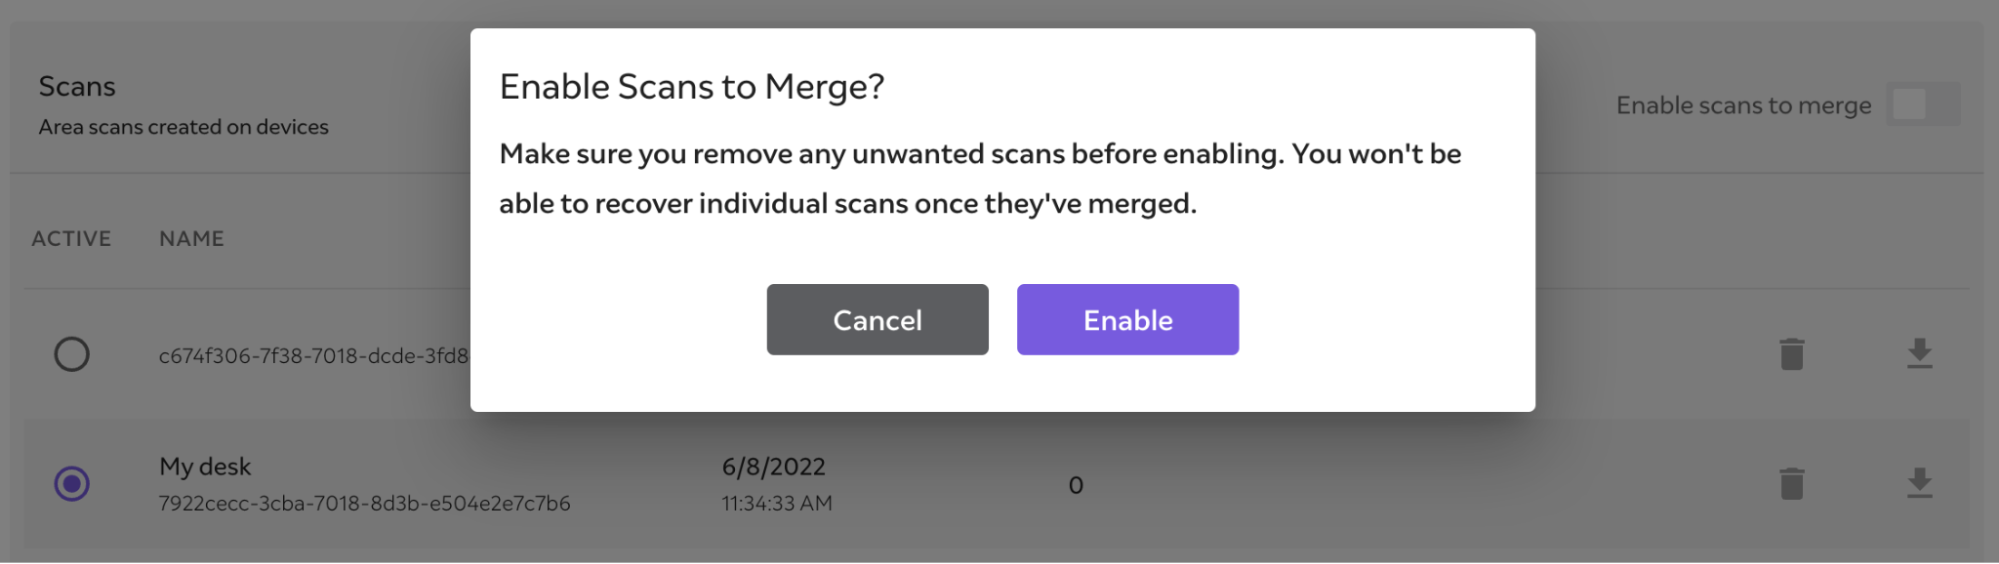 A prompt asking users if they want to enable a mesh merge